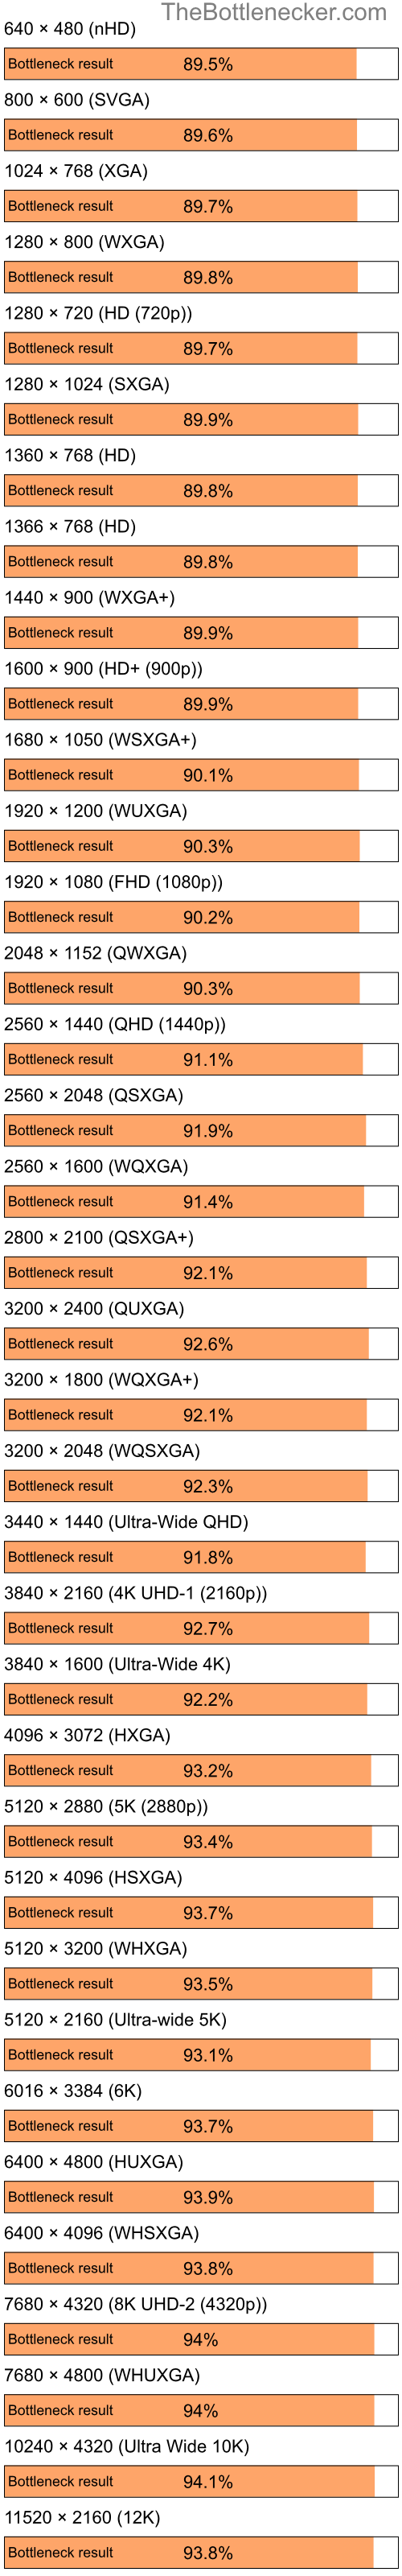 Bottleneck results by resolution for Intel Pentium 4 and AMD Radeon 9250 in Processor Intense Tasks